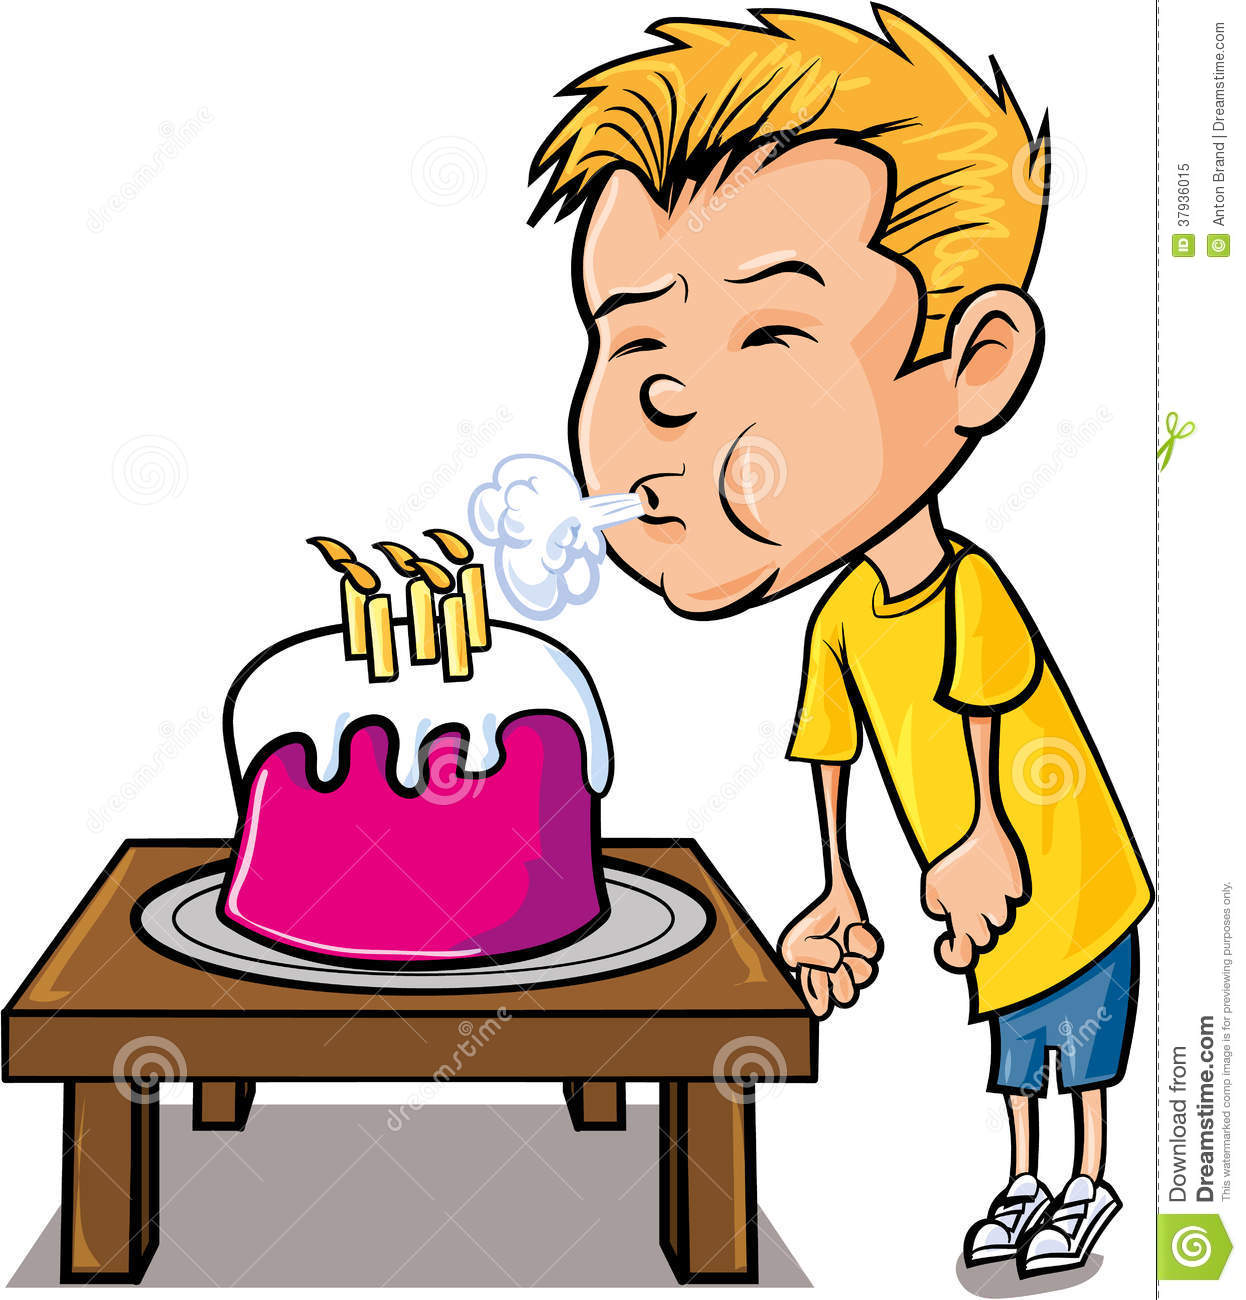 Blow candles clipart.